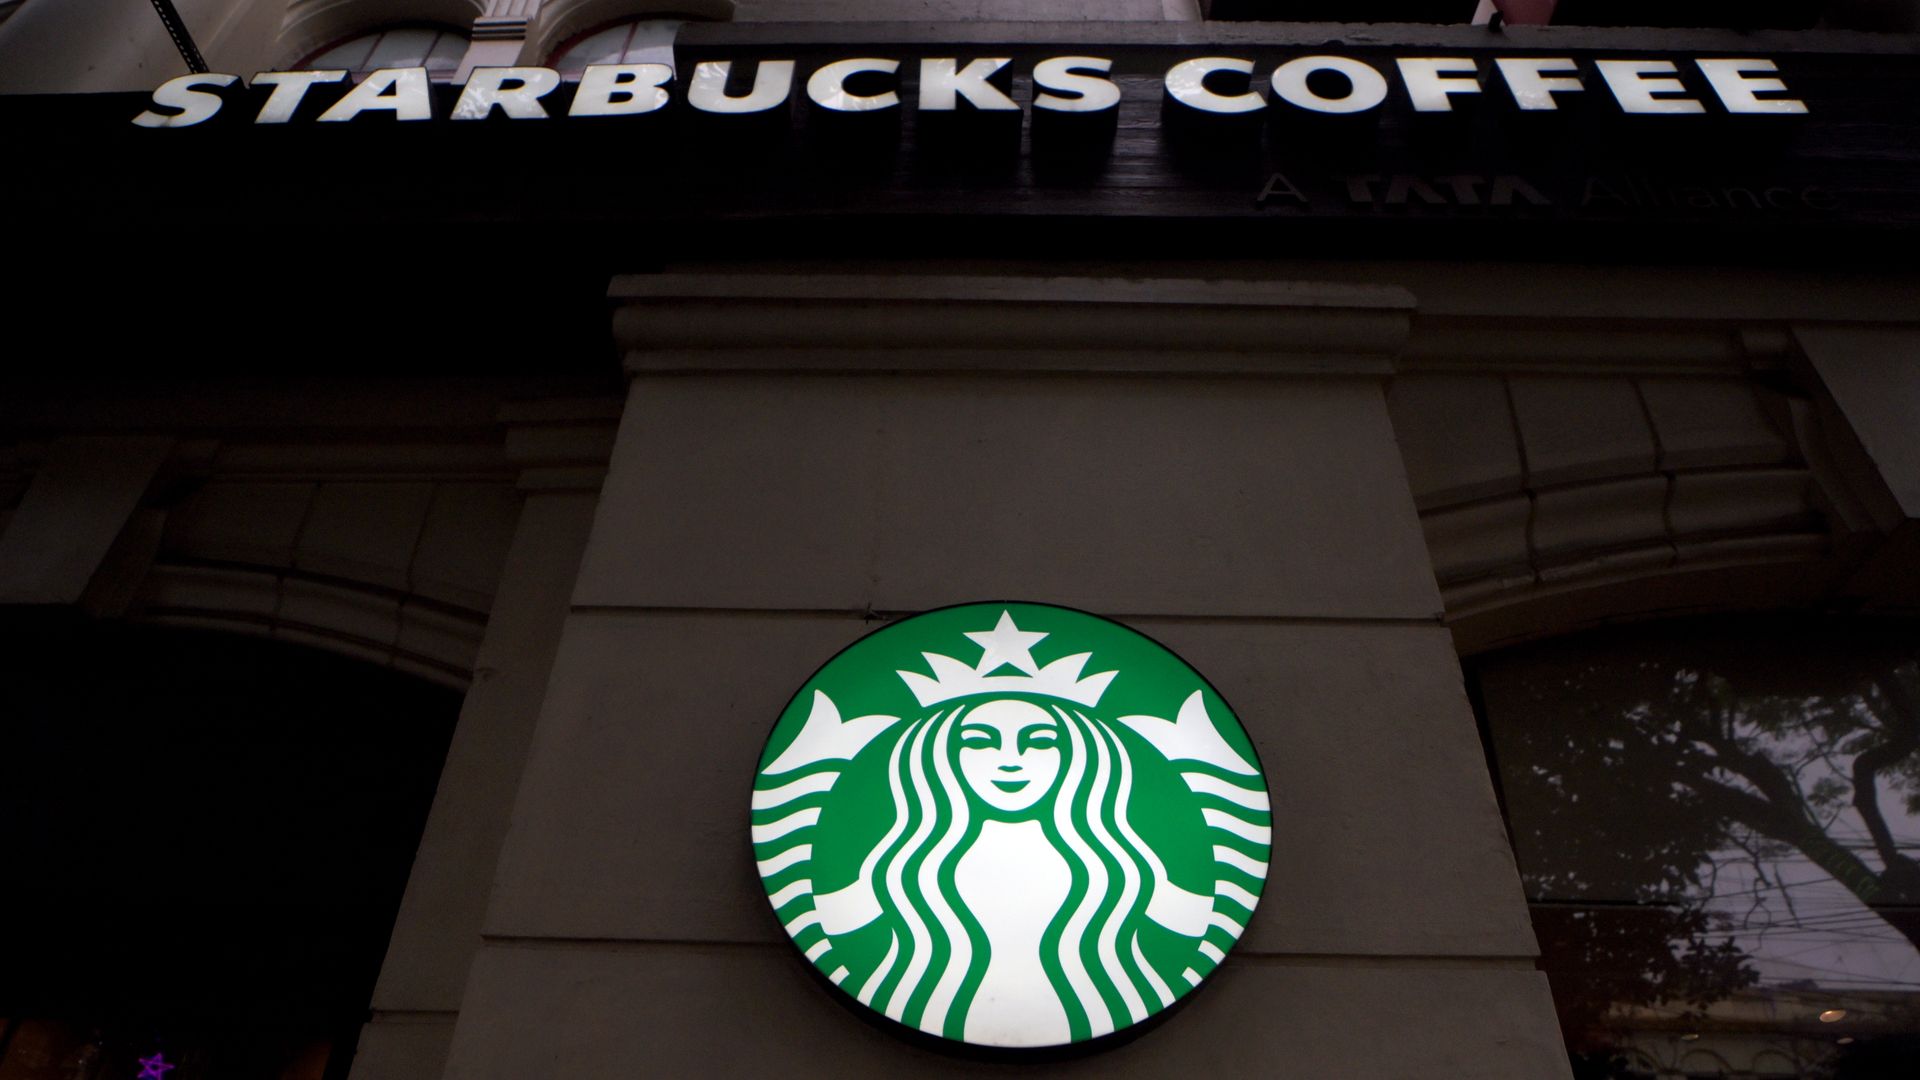 Starbucks makes a carbon pledge for climate change - Axios